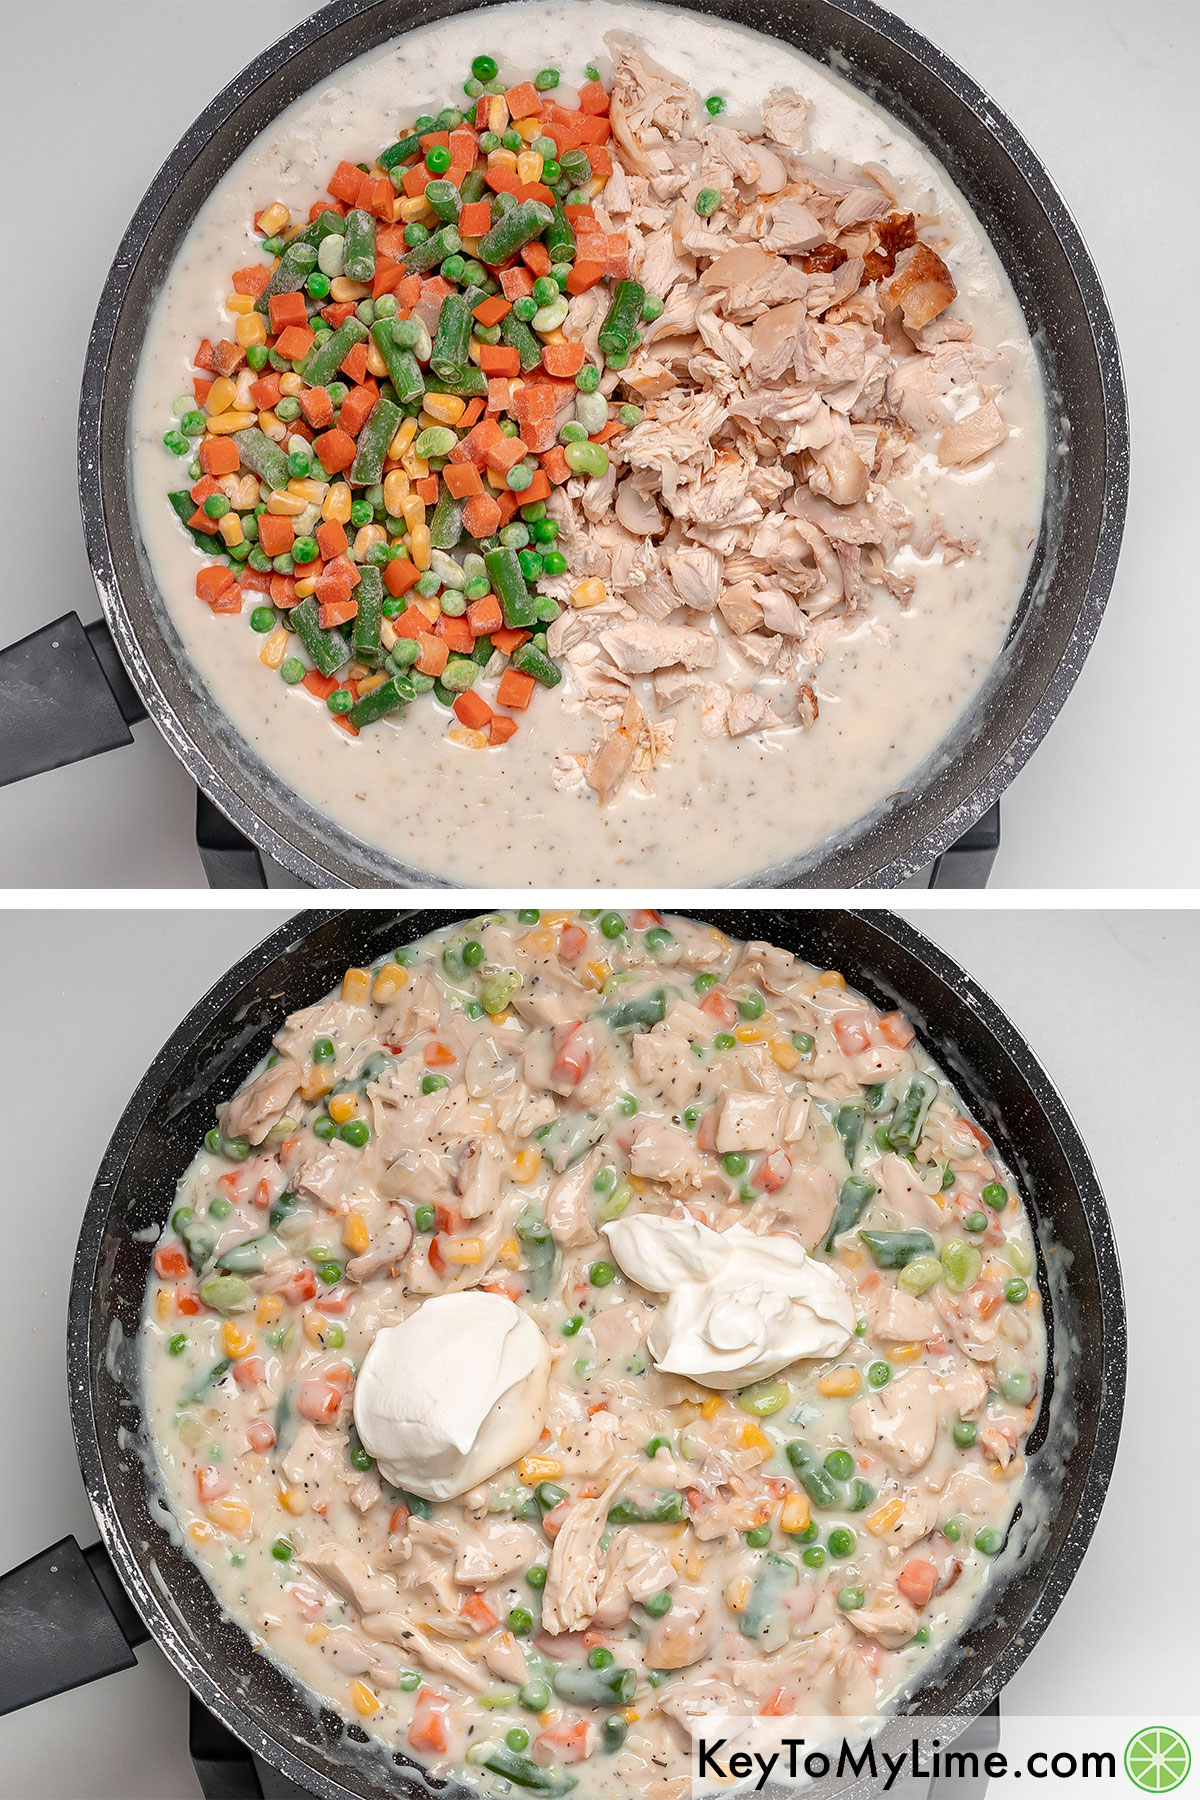 Mixing the cooked chicken and vegetables through the sauce and adding sour cream on top.